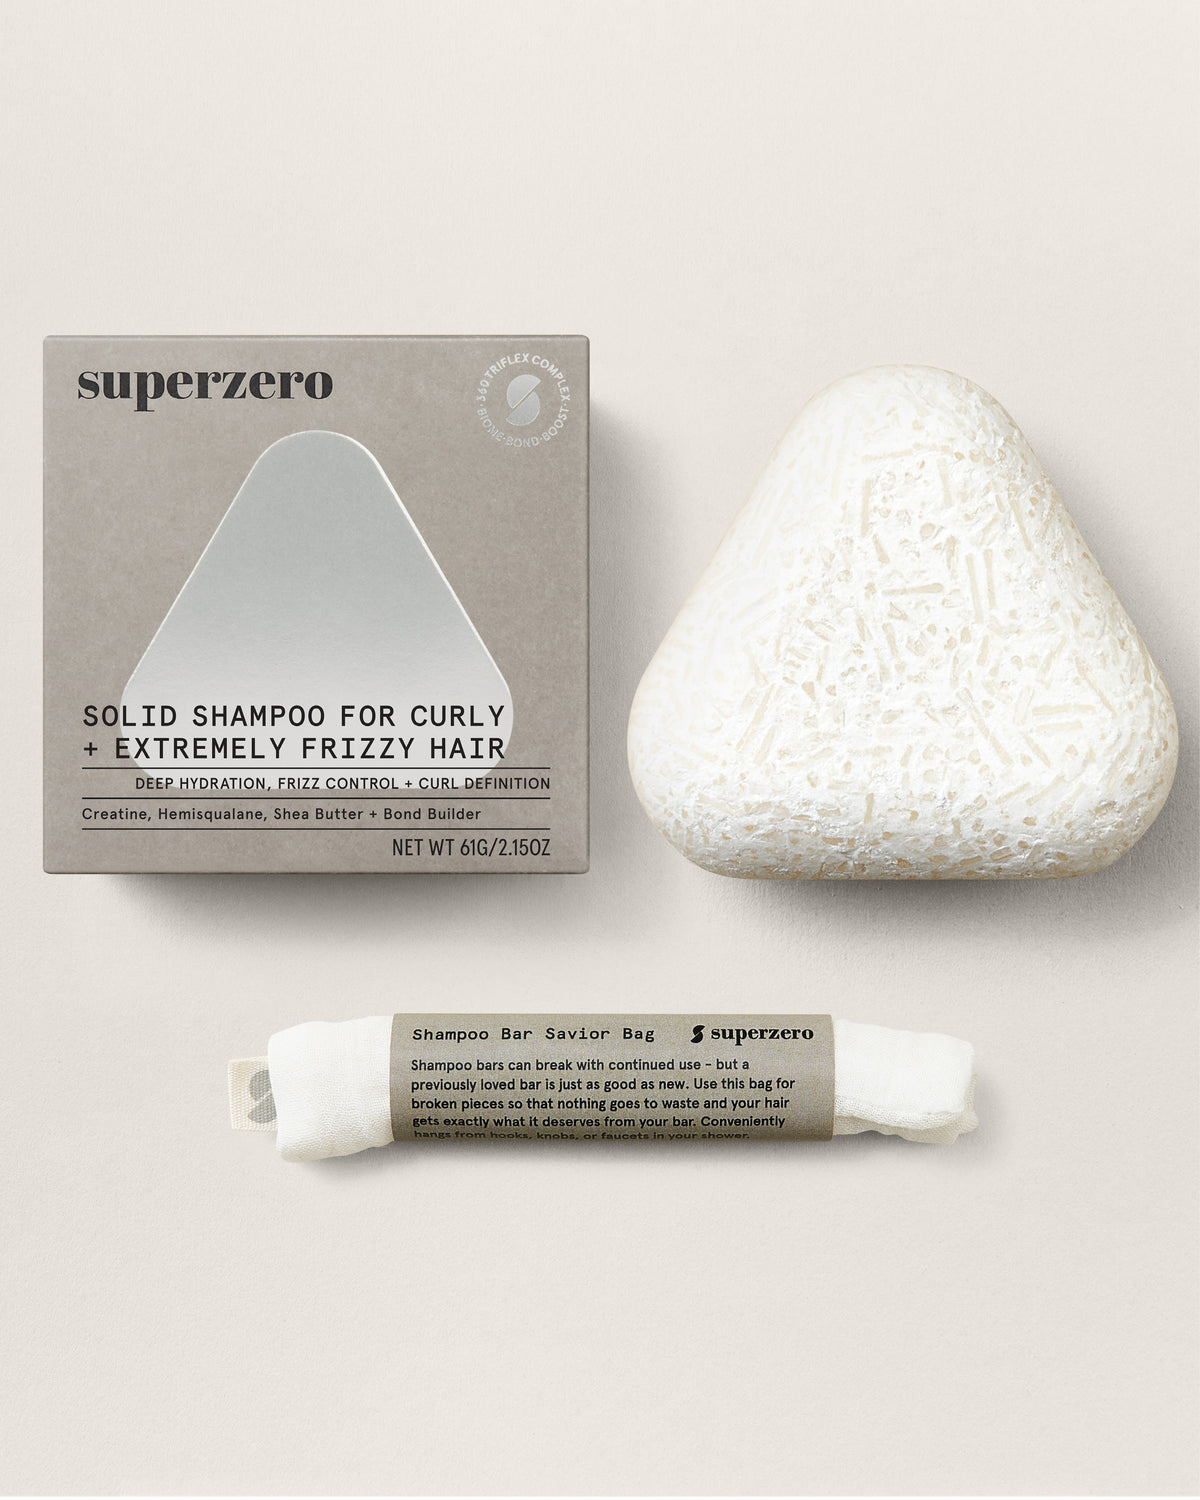 Deep Moisture + Anti Frizz Shampoo Bar for Curly, Coily, Extremely Frizzy Hair